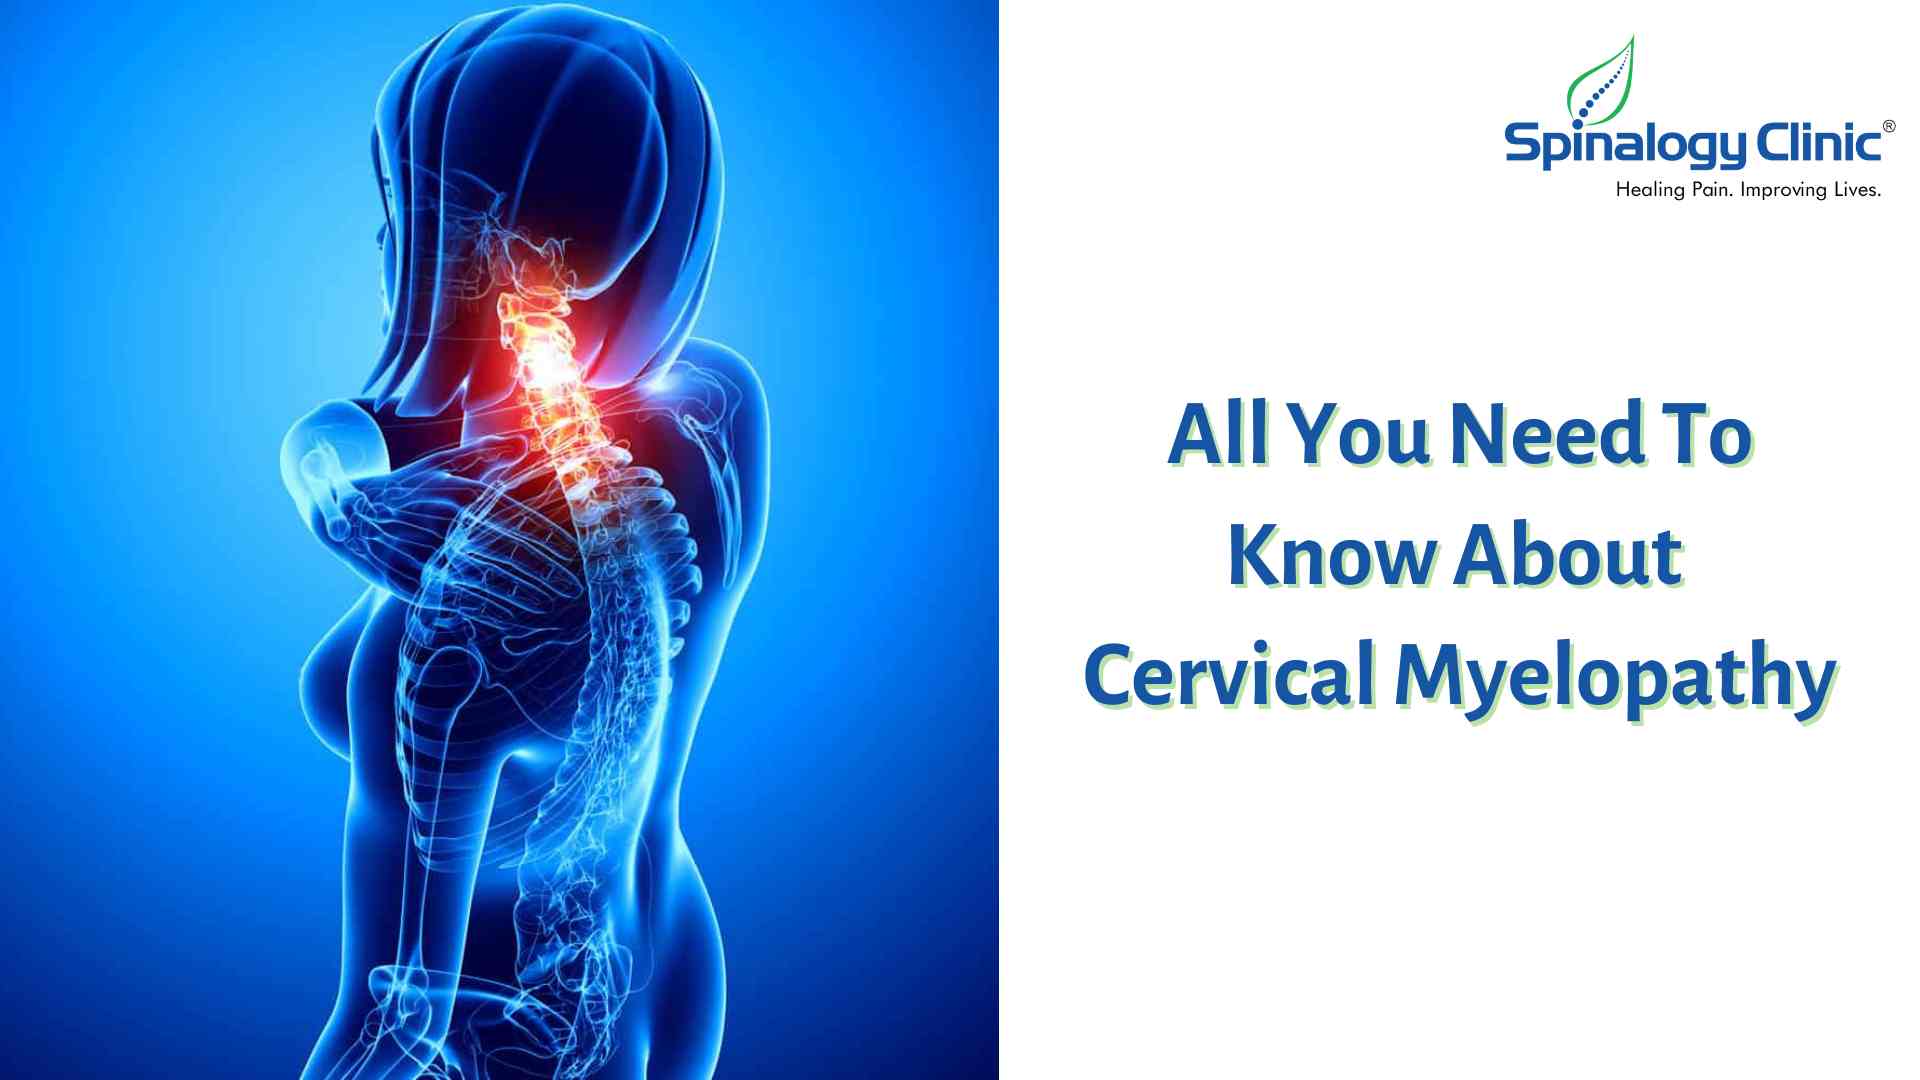 All You Need to Know About Cervical Myelopathy